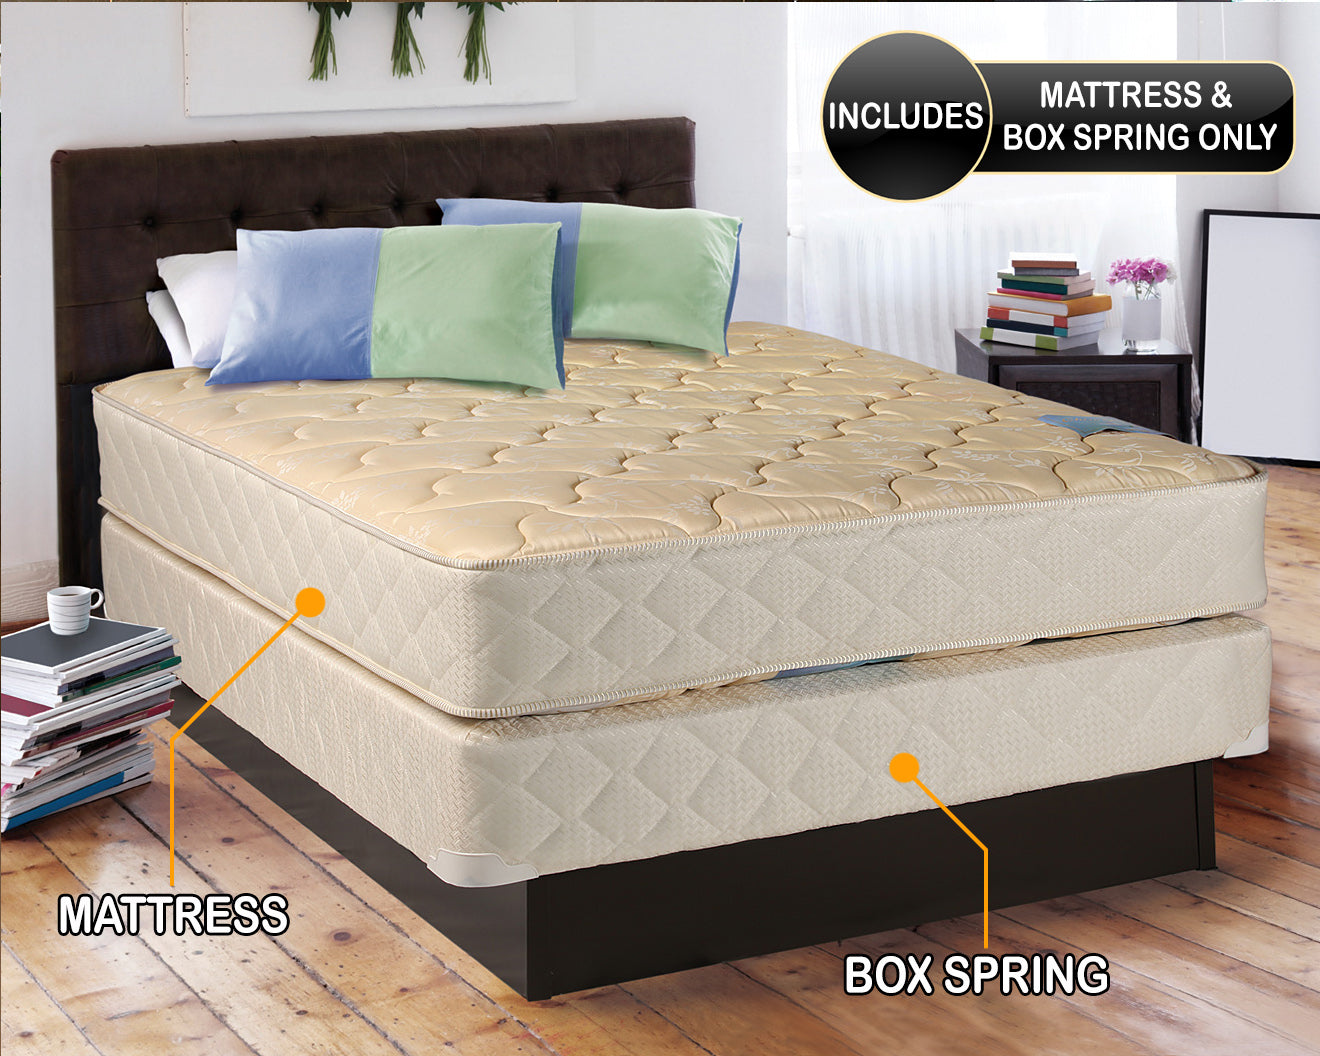 Chiro Premier Orthopedic (Beige) California King Size Mattress and Box Spring Set - Fully Assembled, Good for Your Back, Long Lasting and 2 Sided